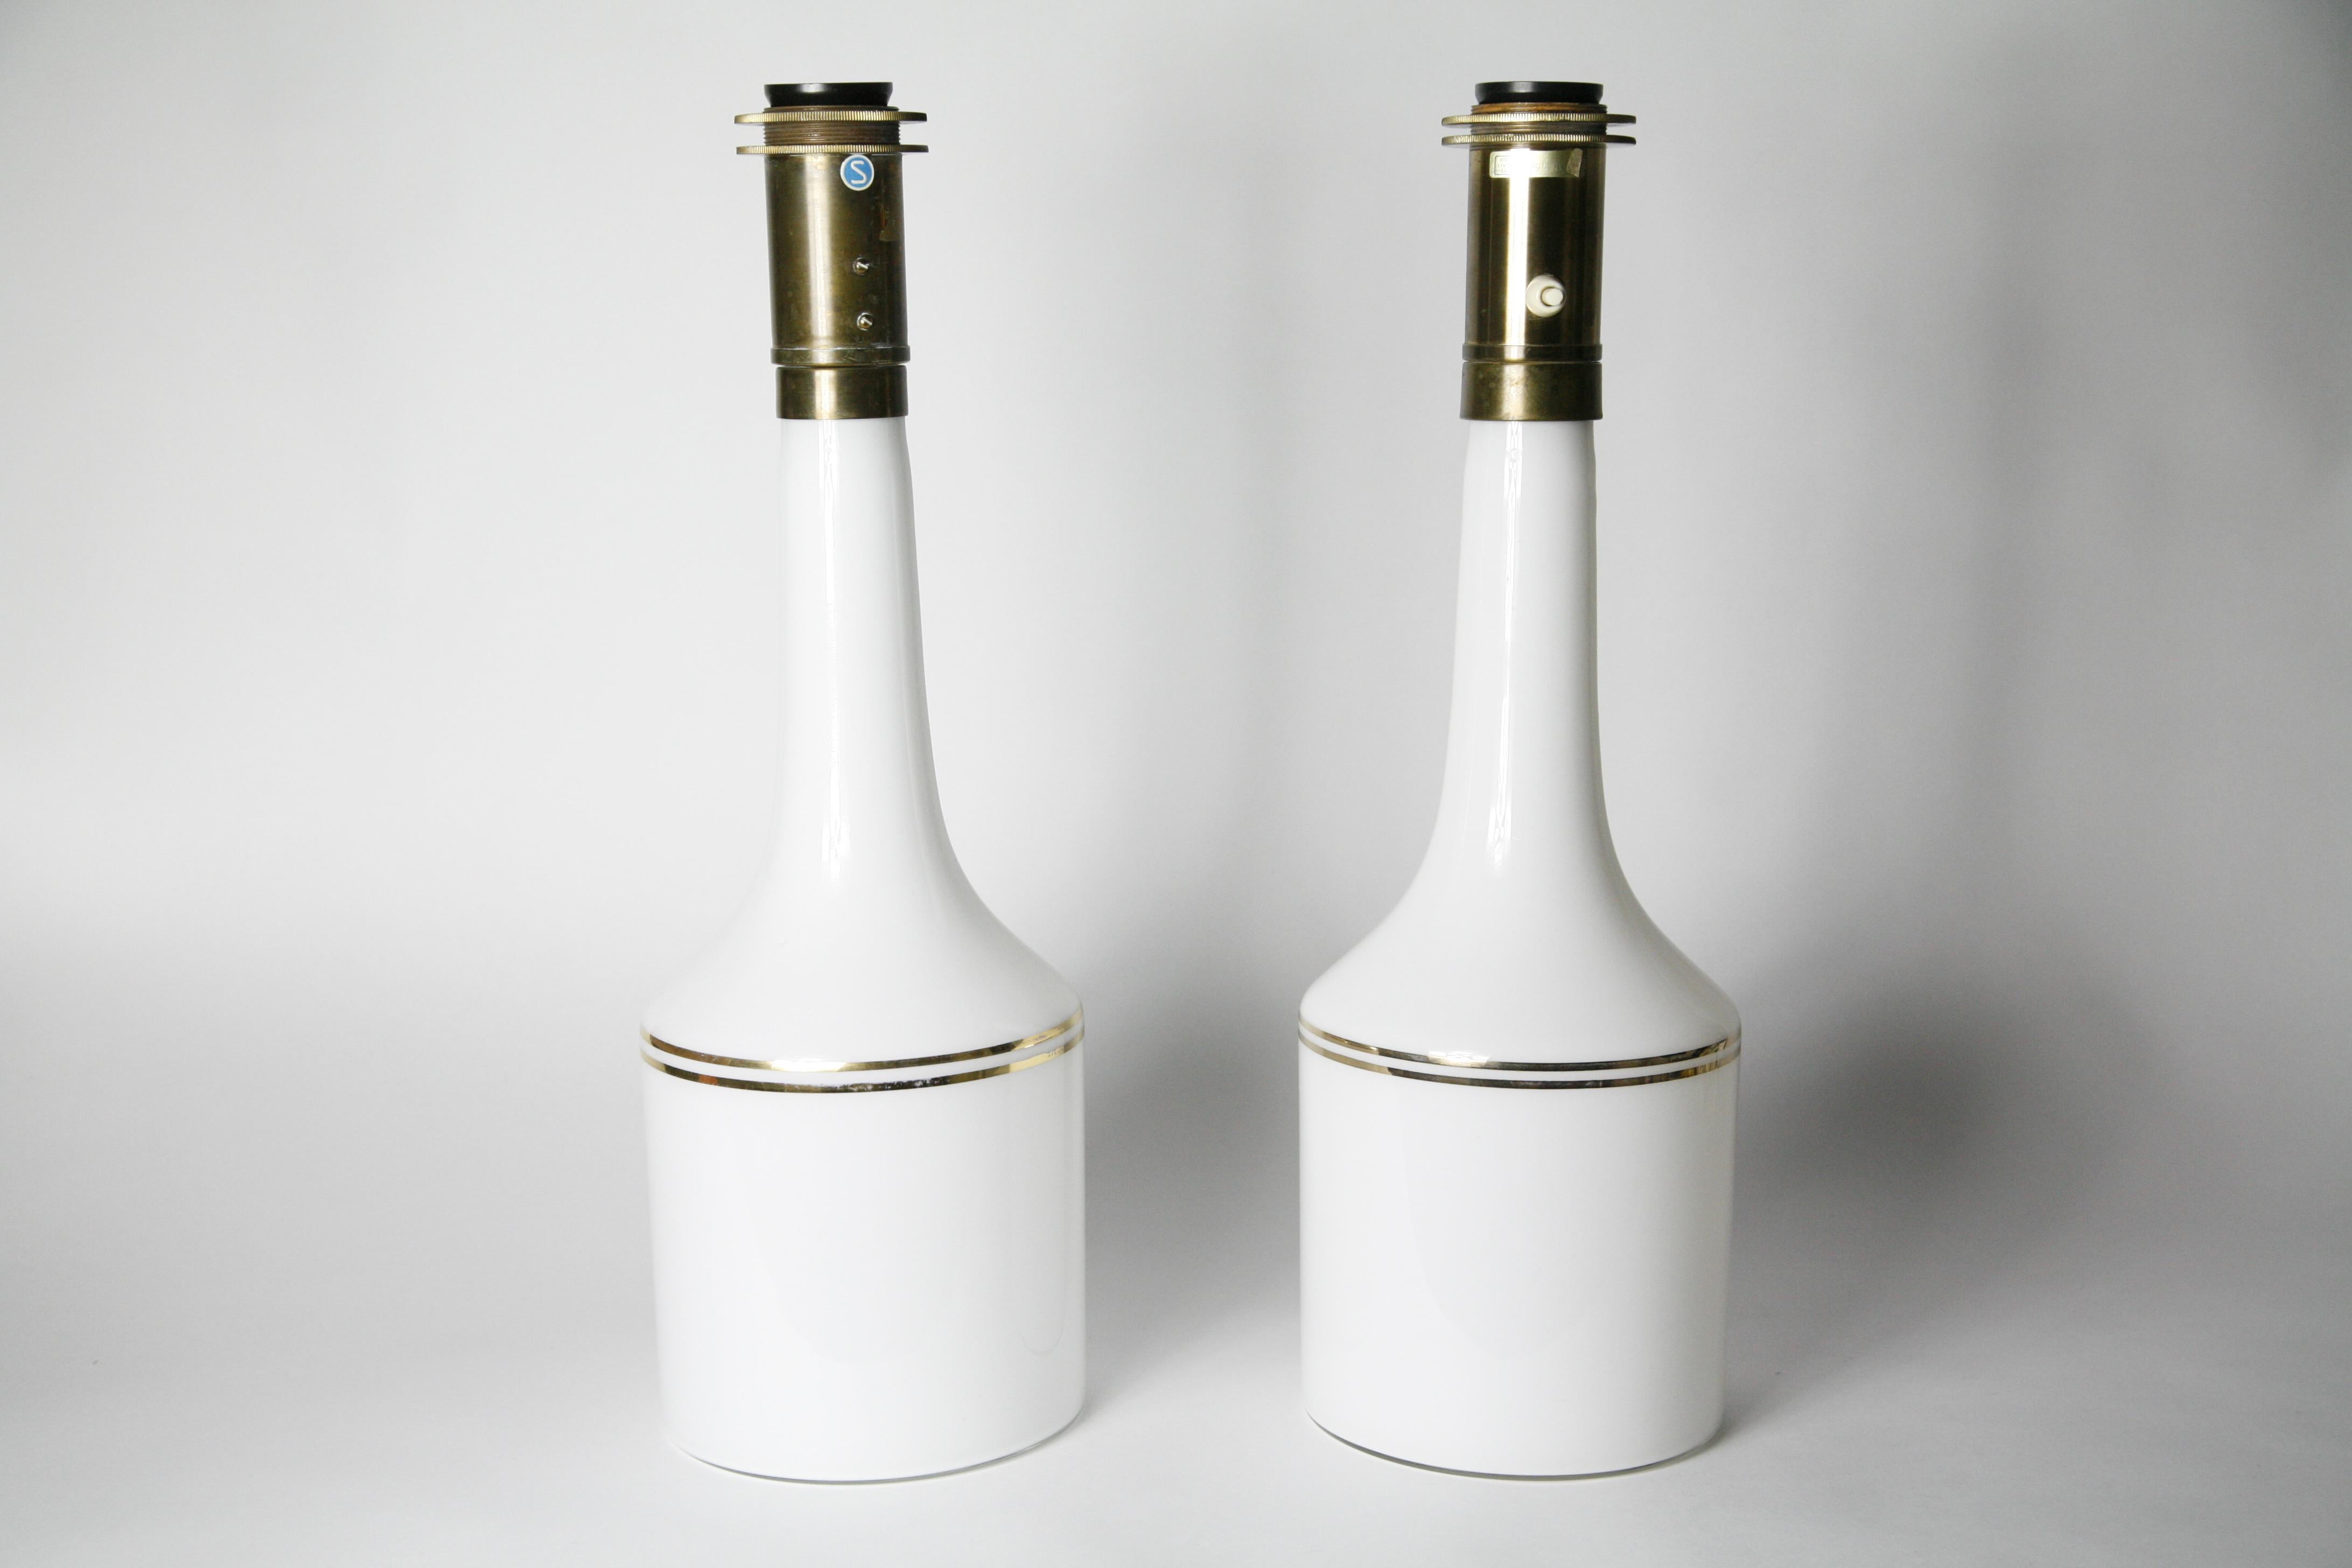 Pair of white Swedish Luxus Glass Lamps with a Gold Stripe, Sweden, 1950 white bases with a gold band, rewired for the US made by 